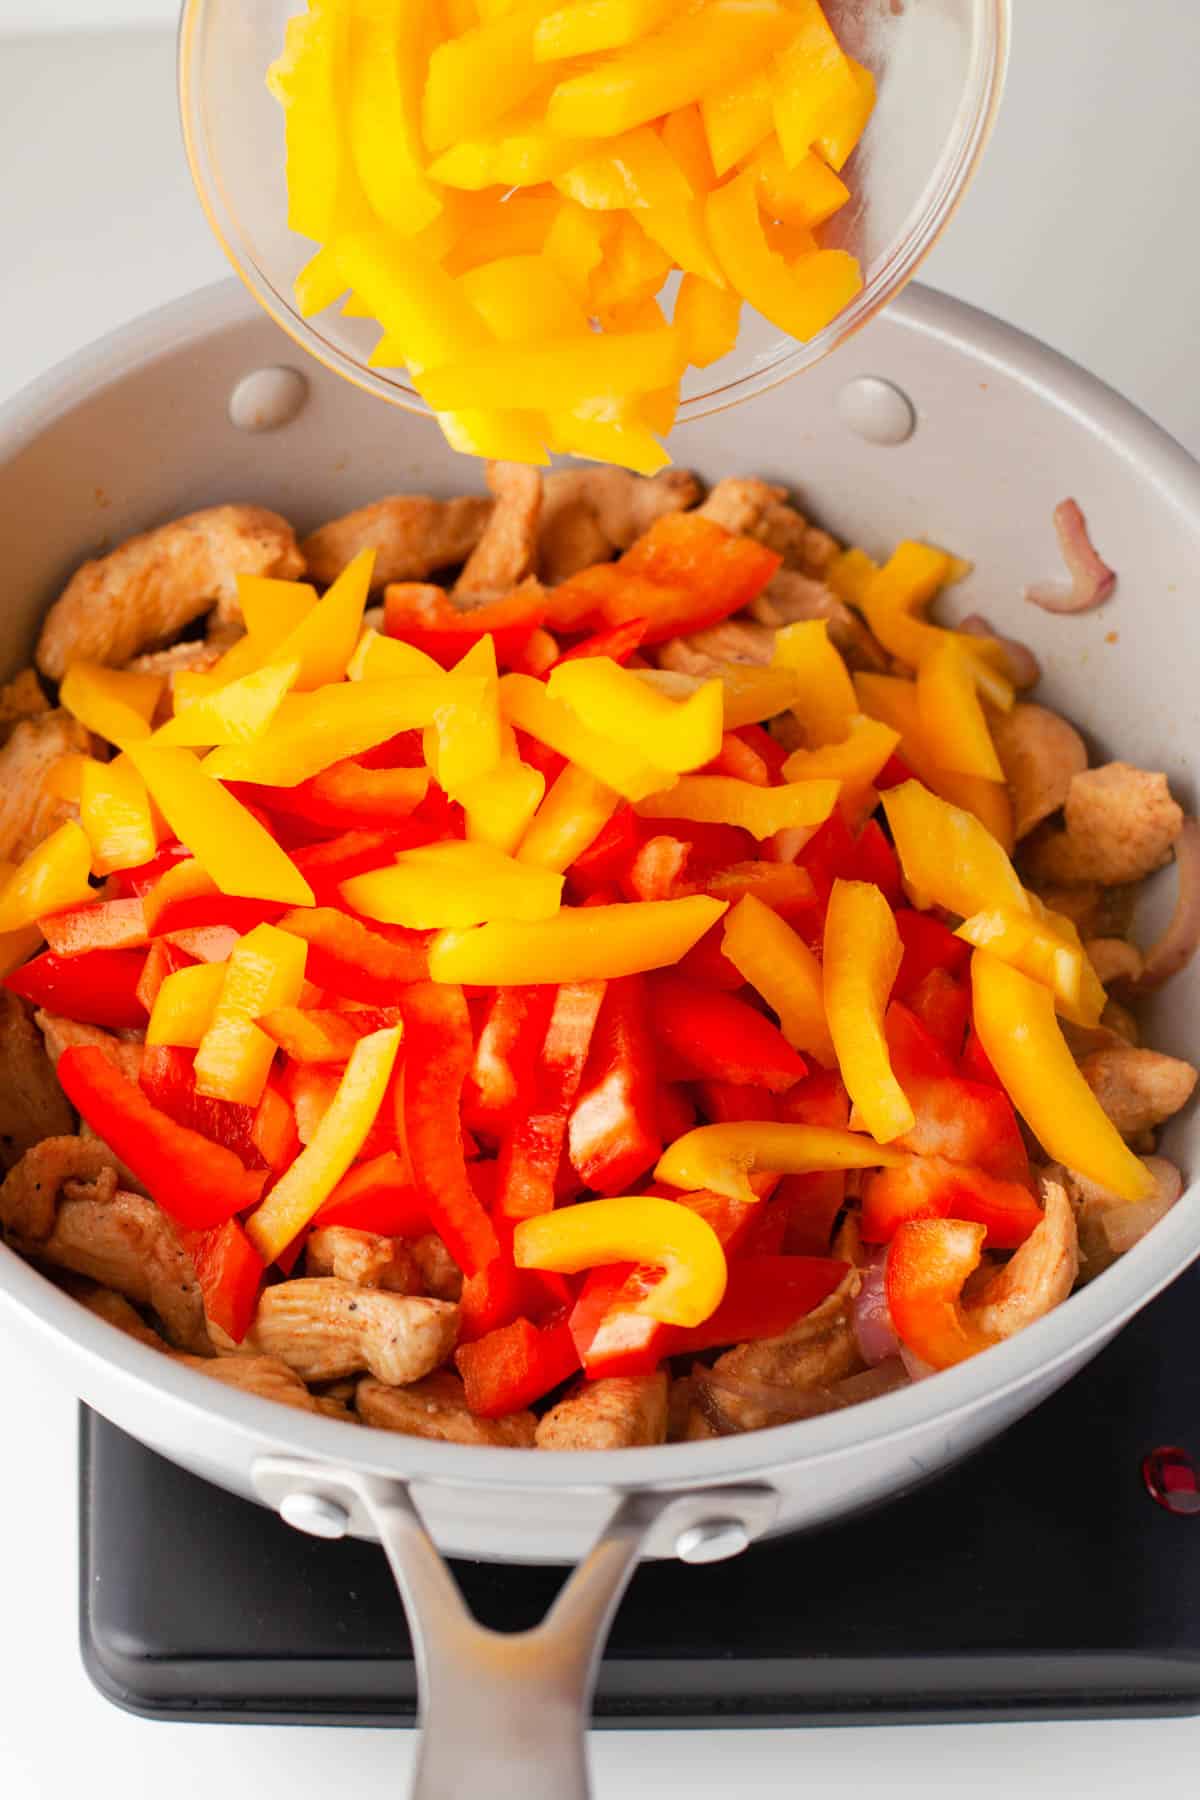 Adding sliced red and yellow bell peppers to cooked fajita chicken in a pan.